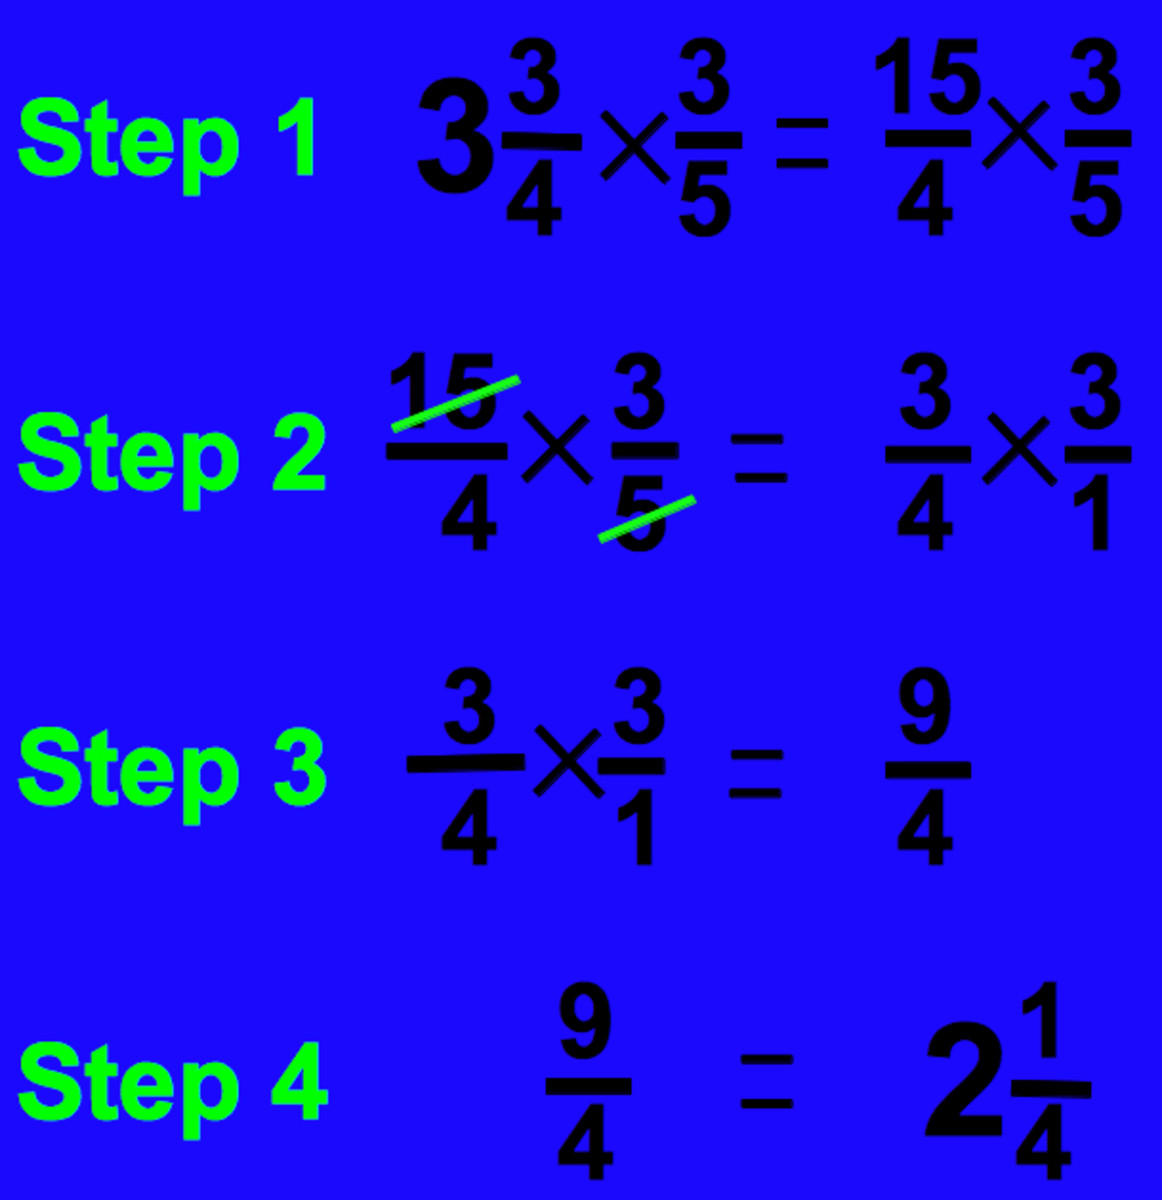 multiplying-fractions-process-examples-expii